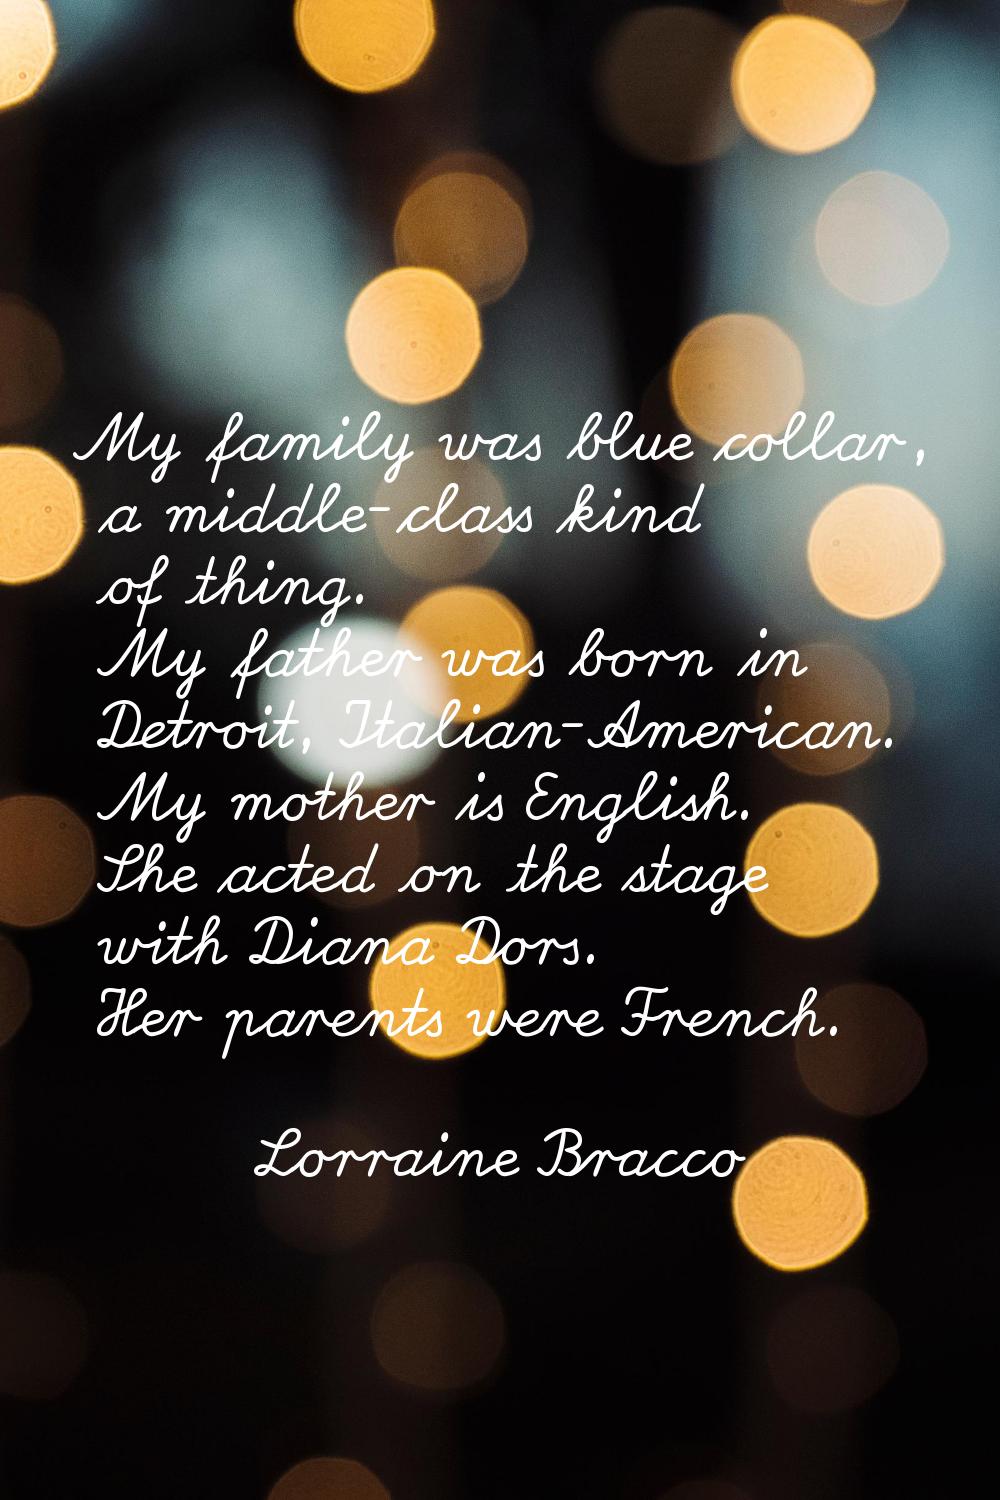 My family was blue collar, a middle-class kind of thing. My father was born in Detroit, Italian-Ame